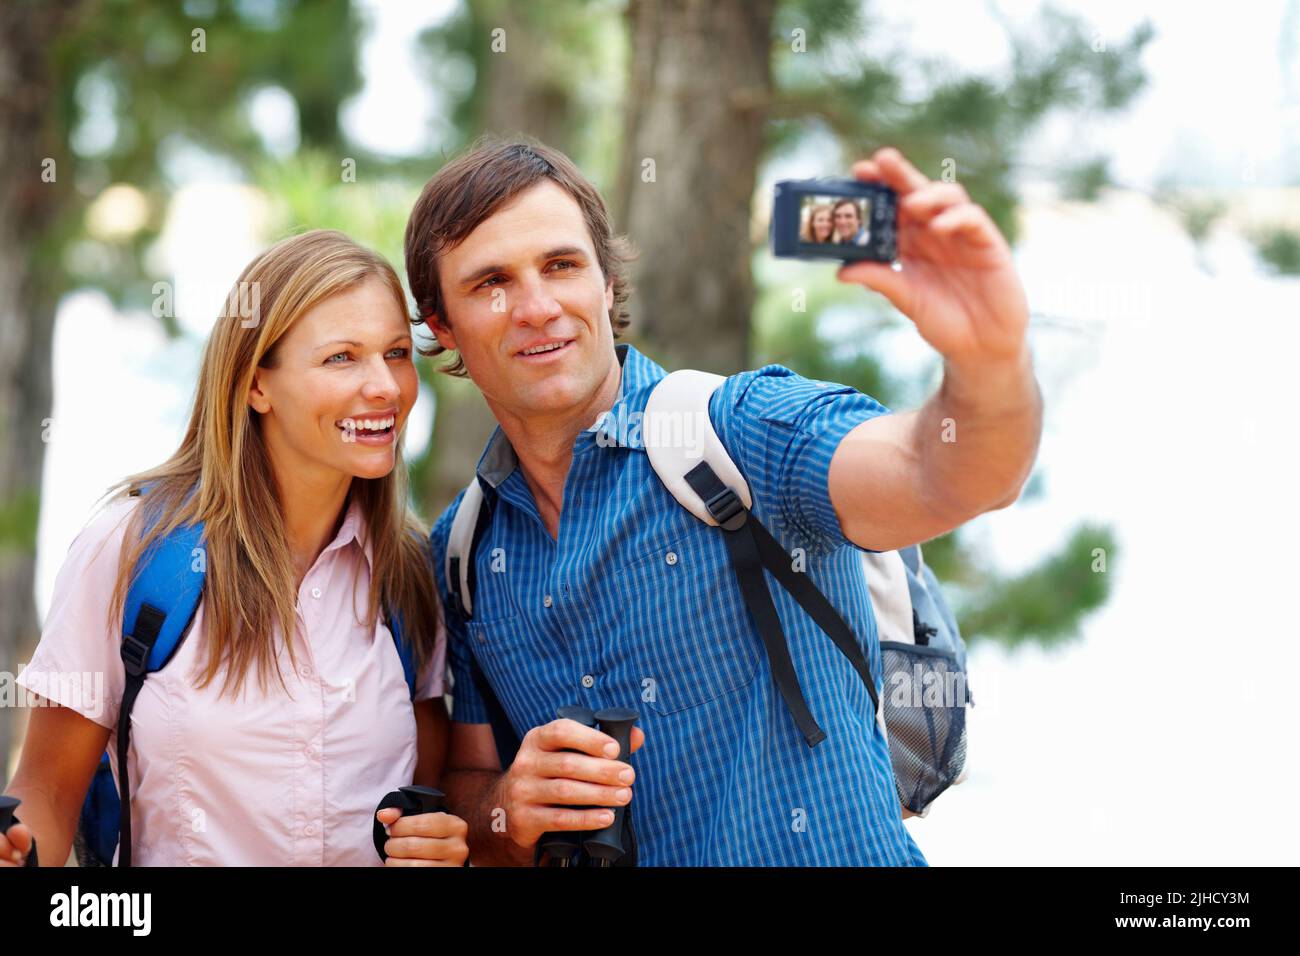 Hiking memories. Couple taking a photograph of themselves while hiking. Stock Photo